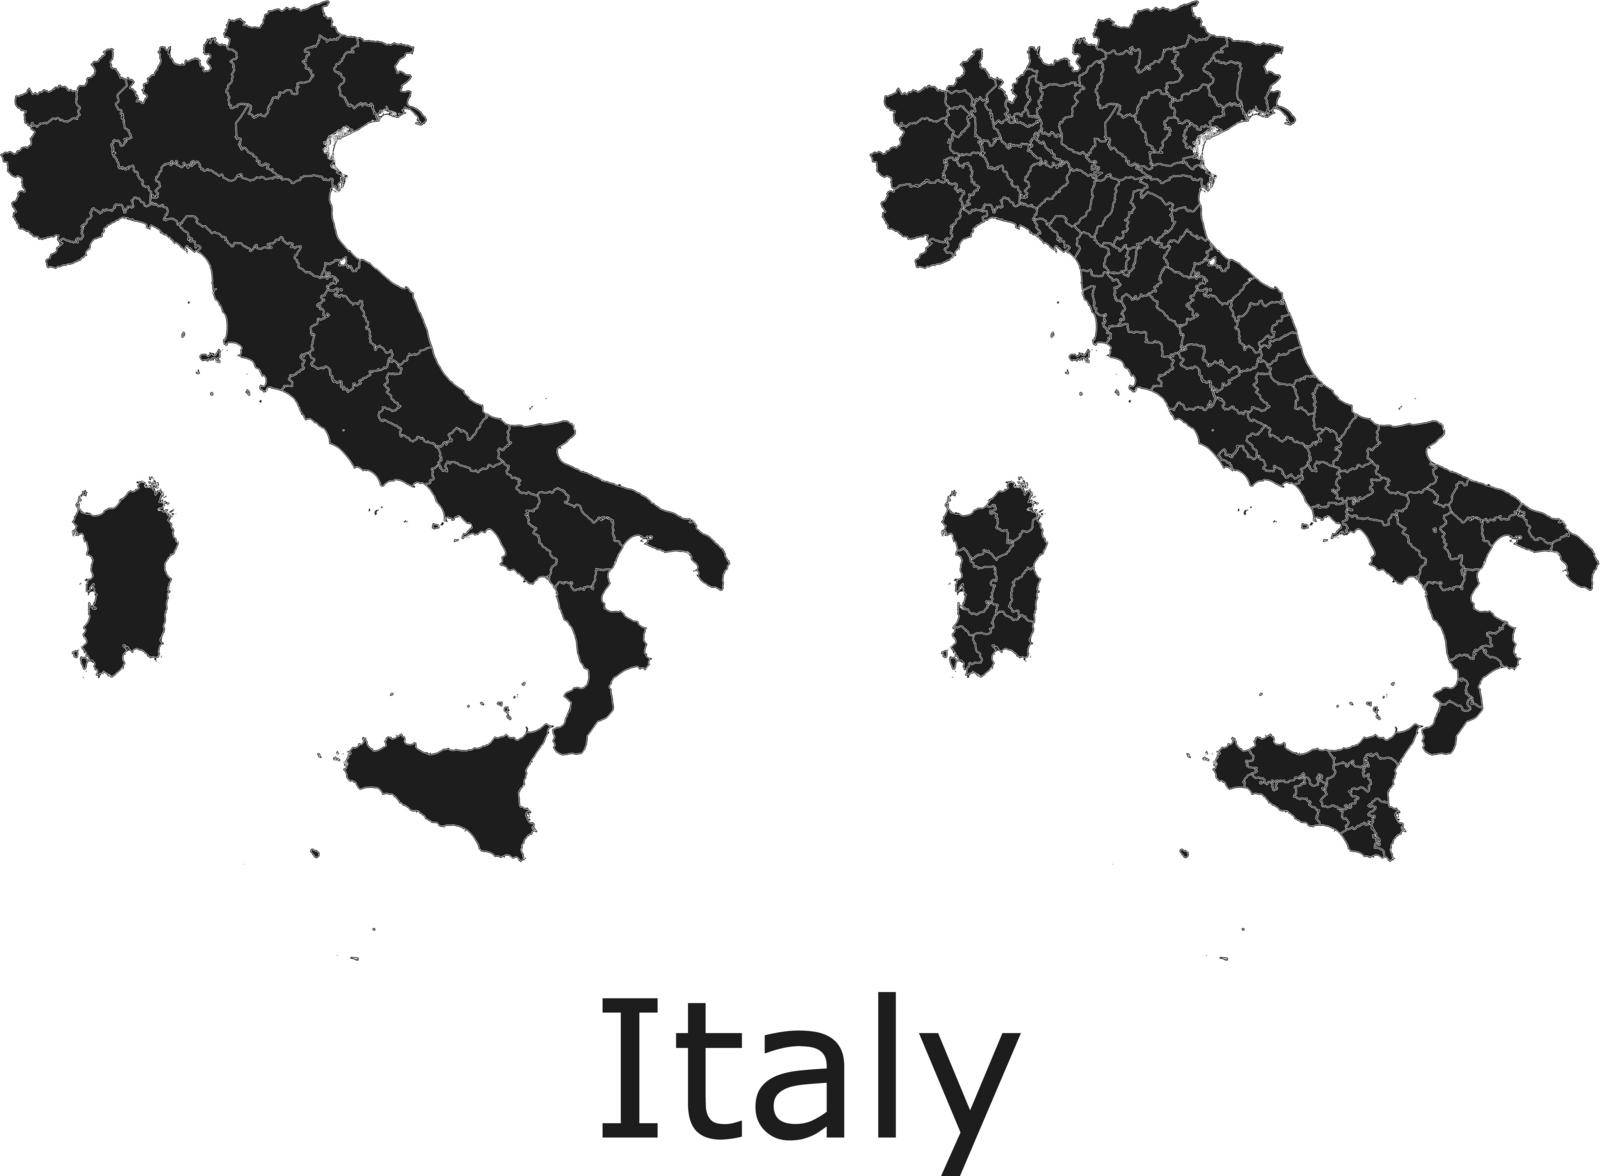 Italy map with regional division by Litteralis